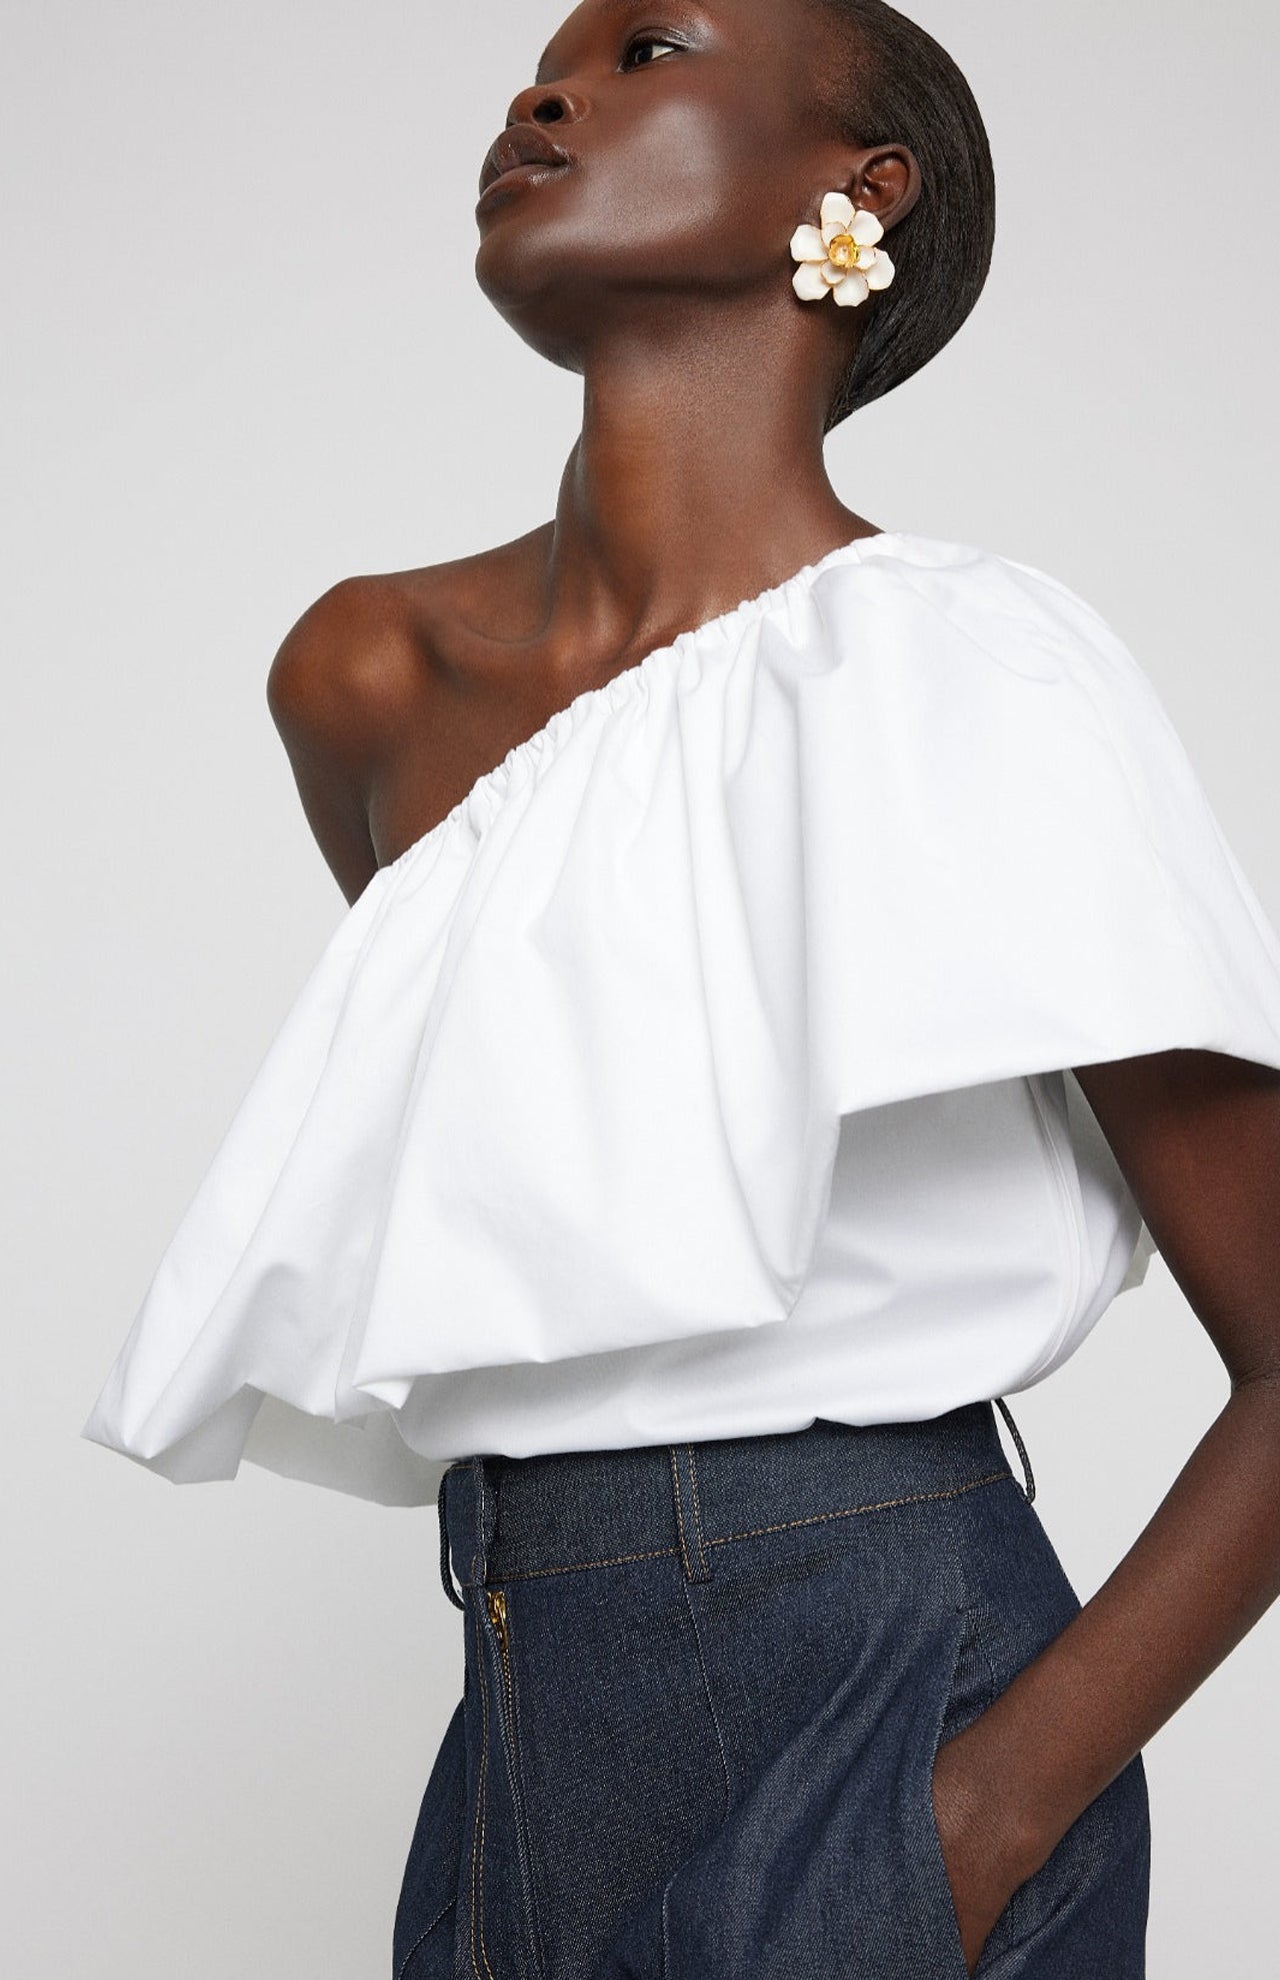 Blair Cotton Ruffle Top  Outfit details, Ruffle top, Aesthetic clothes